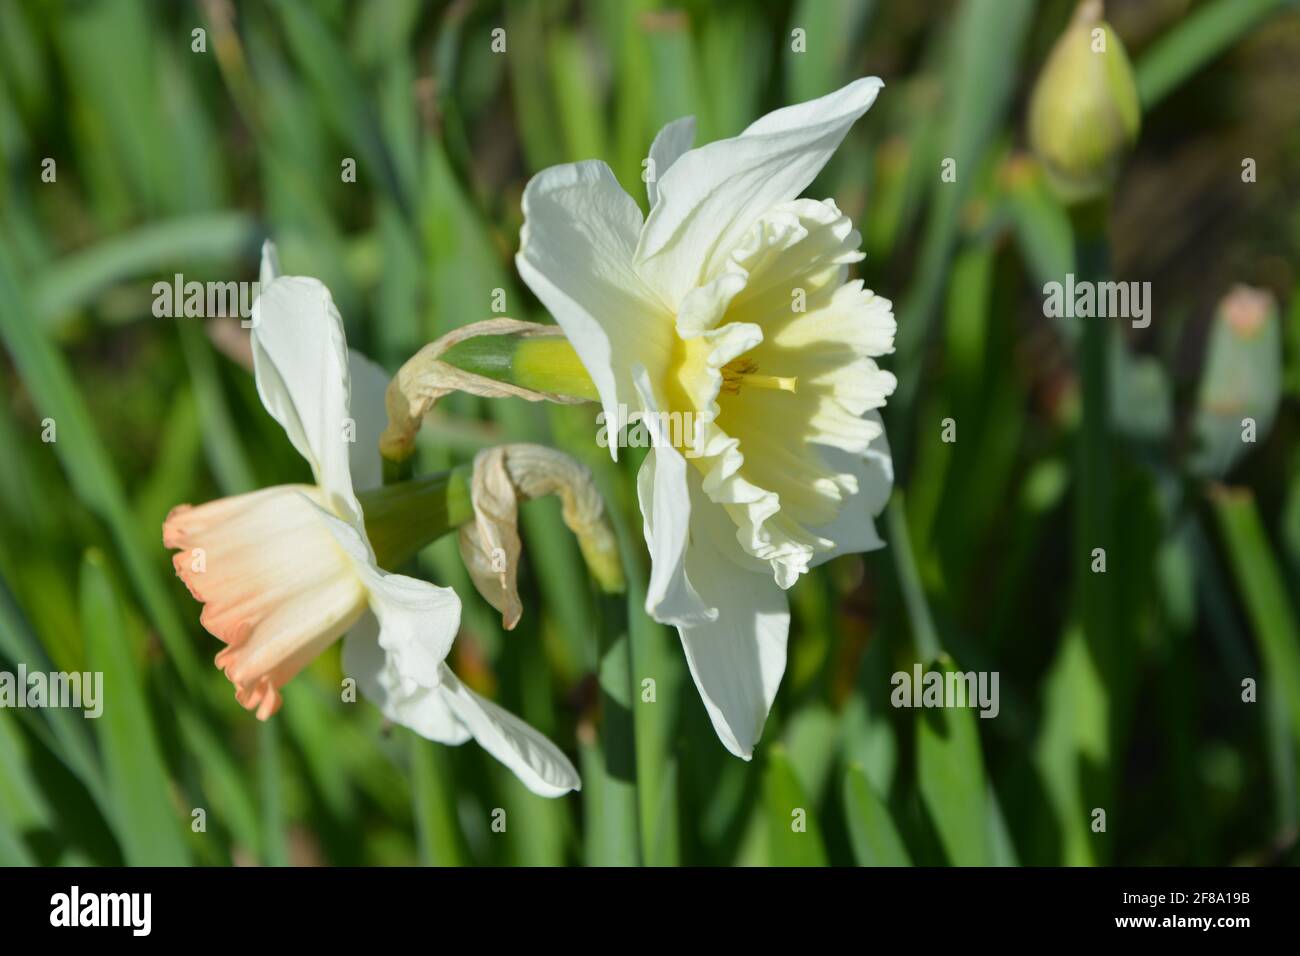 Daffodil Duet, Daffodil Duo, Daffodils, Narcissus In England UK High Resolution Stock Photo, DSLR Stock Photo